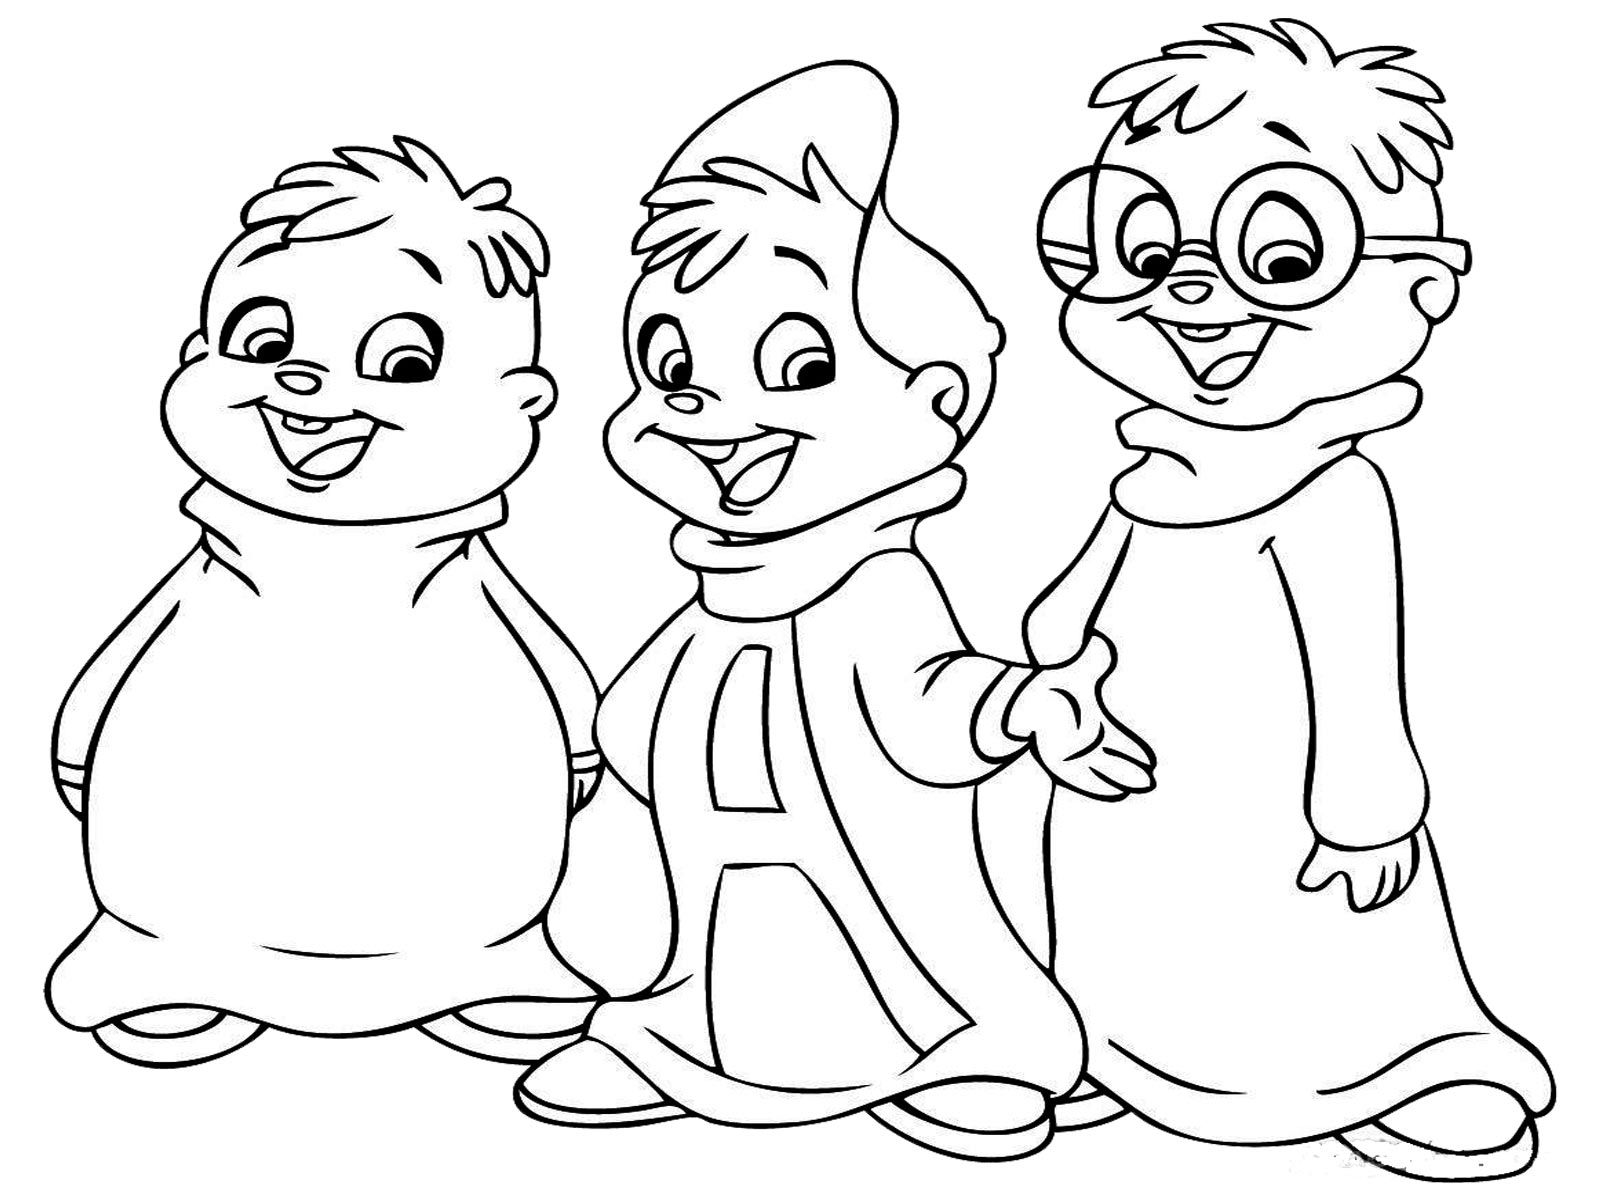 Little Joy Alvin And The Chipmunks Coloring Page